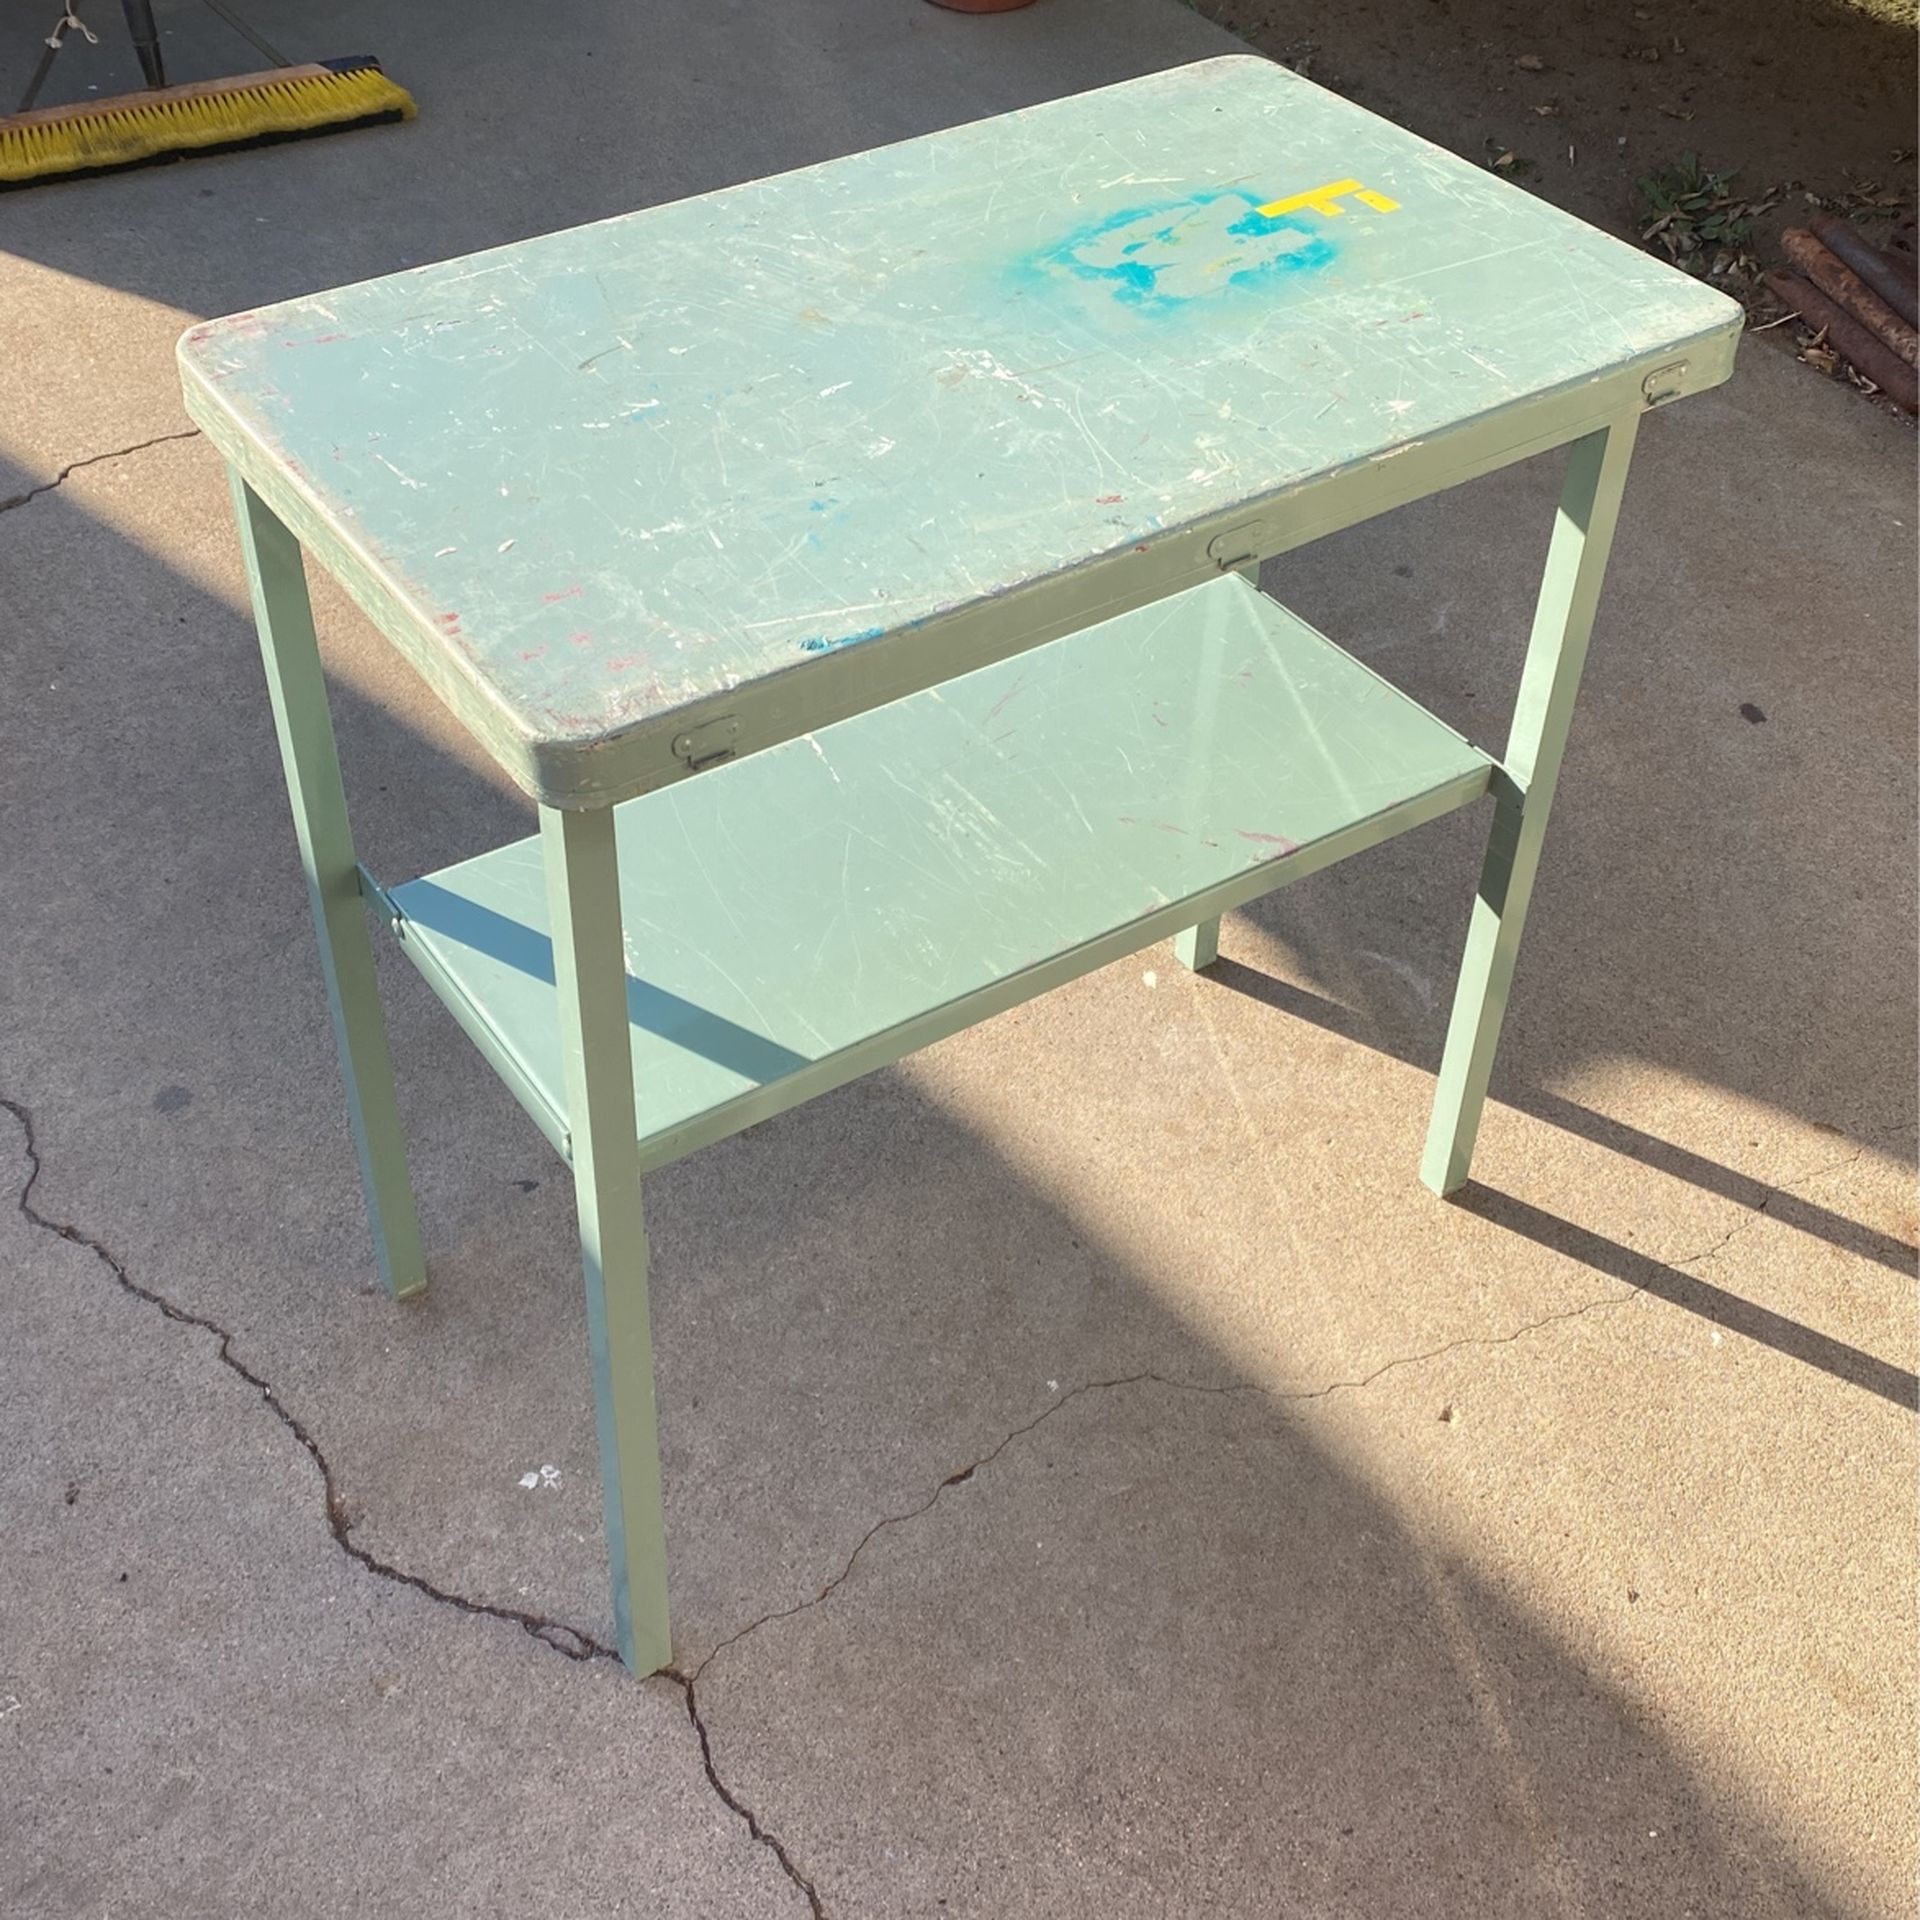 Vintage little aluminum collapsible tables. Great for camping or art projects